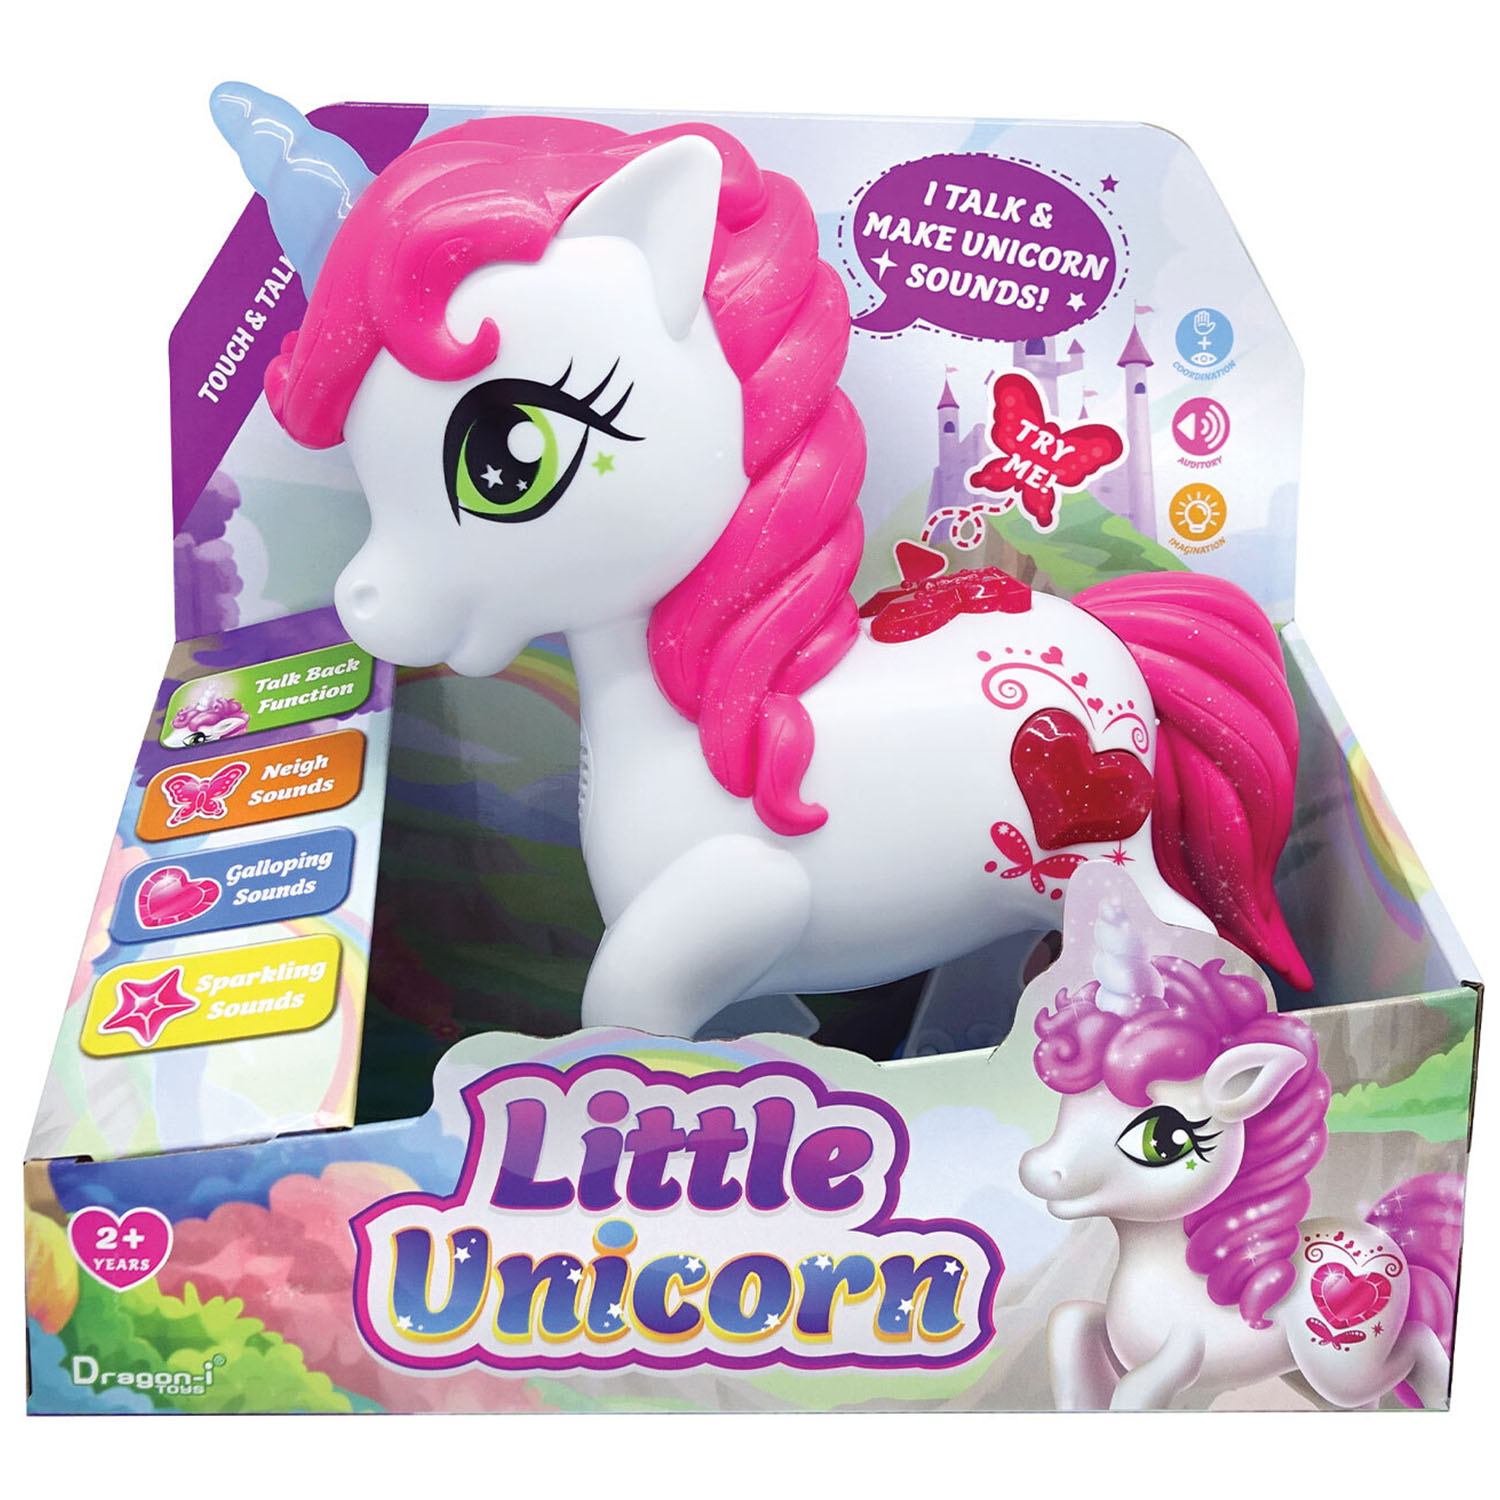 Dragon-i Toys Little Unicorn Touch and Talk Toy Image 1